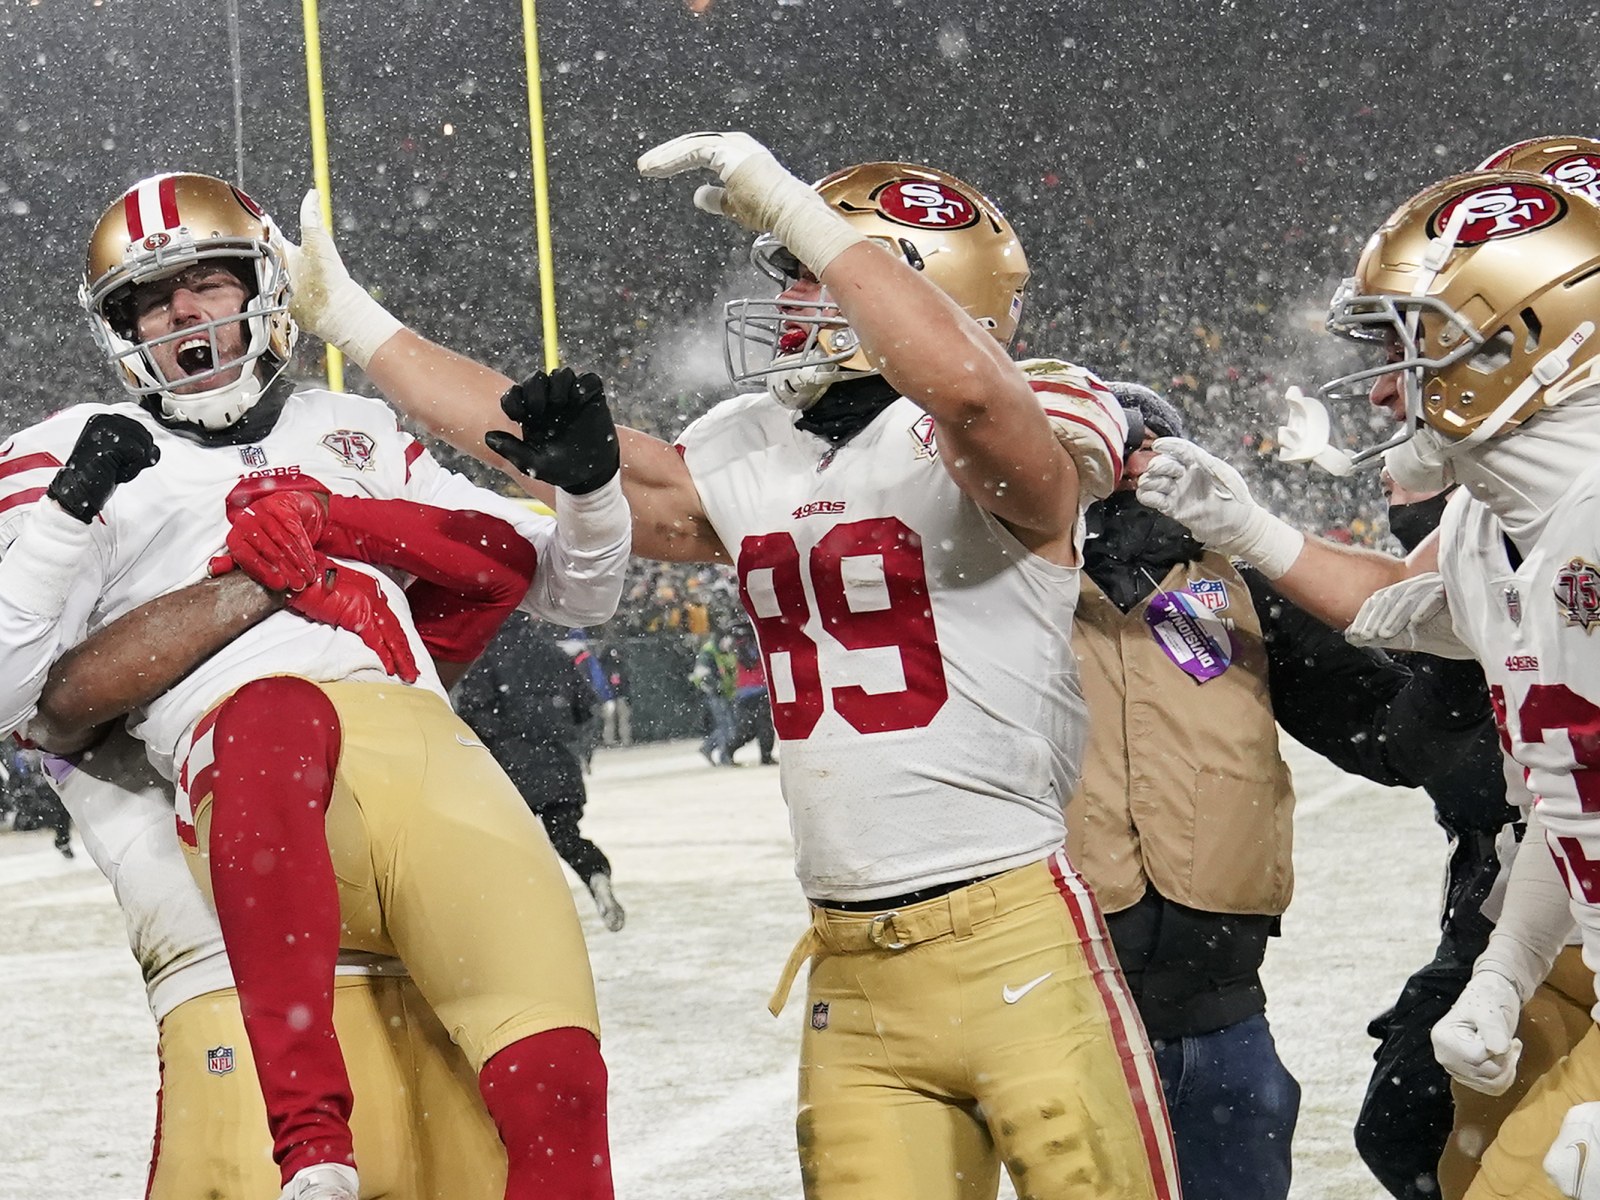 What a game! 49ers stun Packers to reach NFC championship game